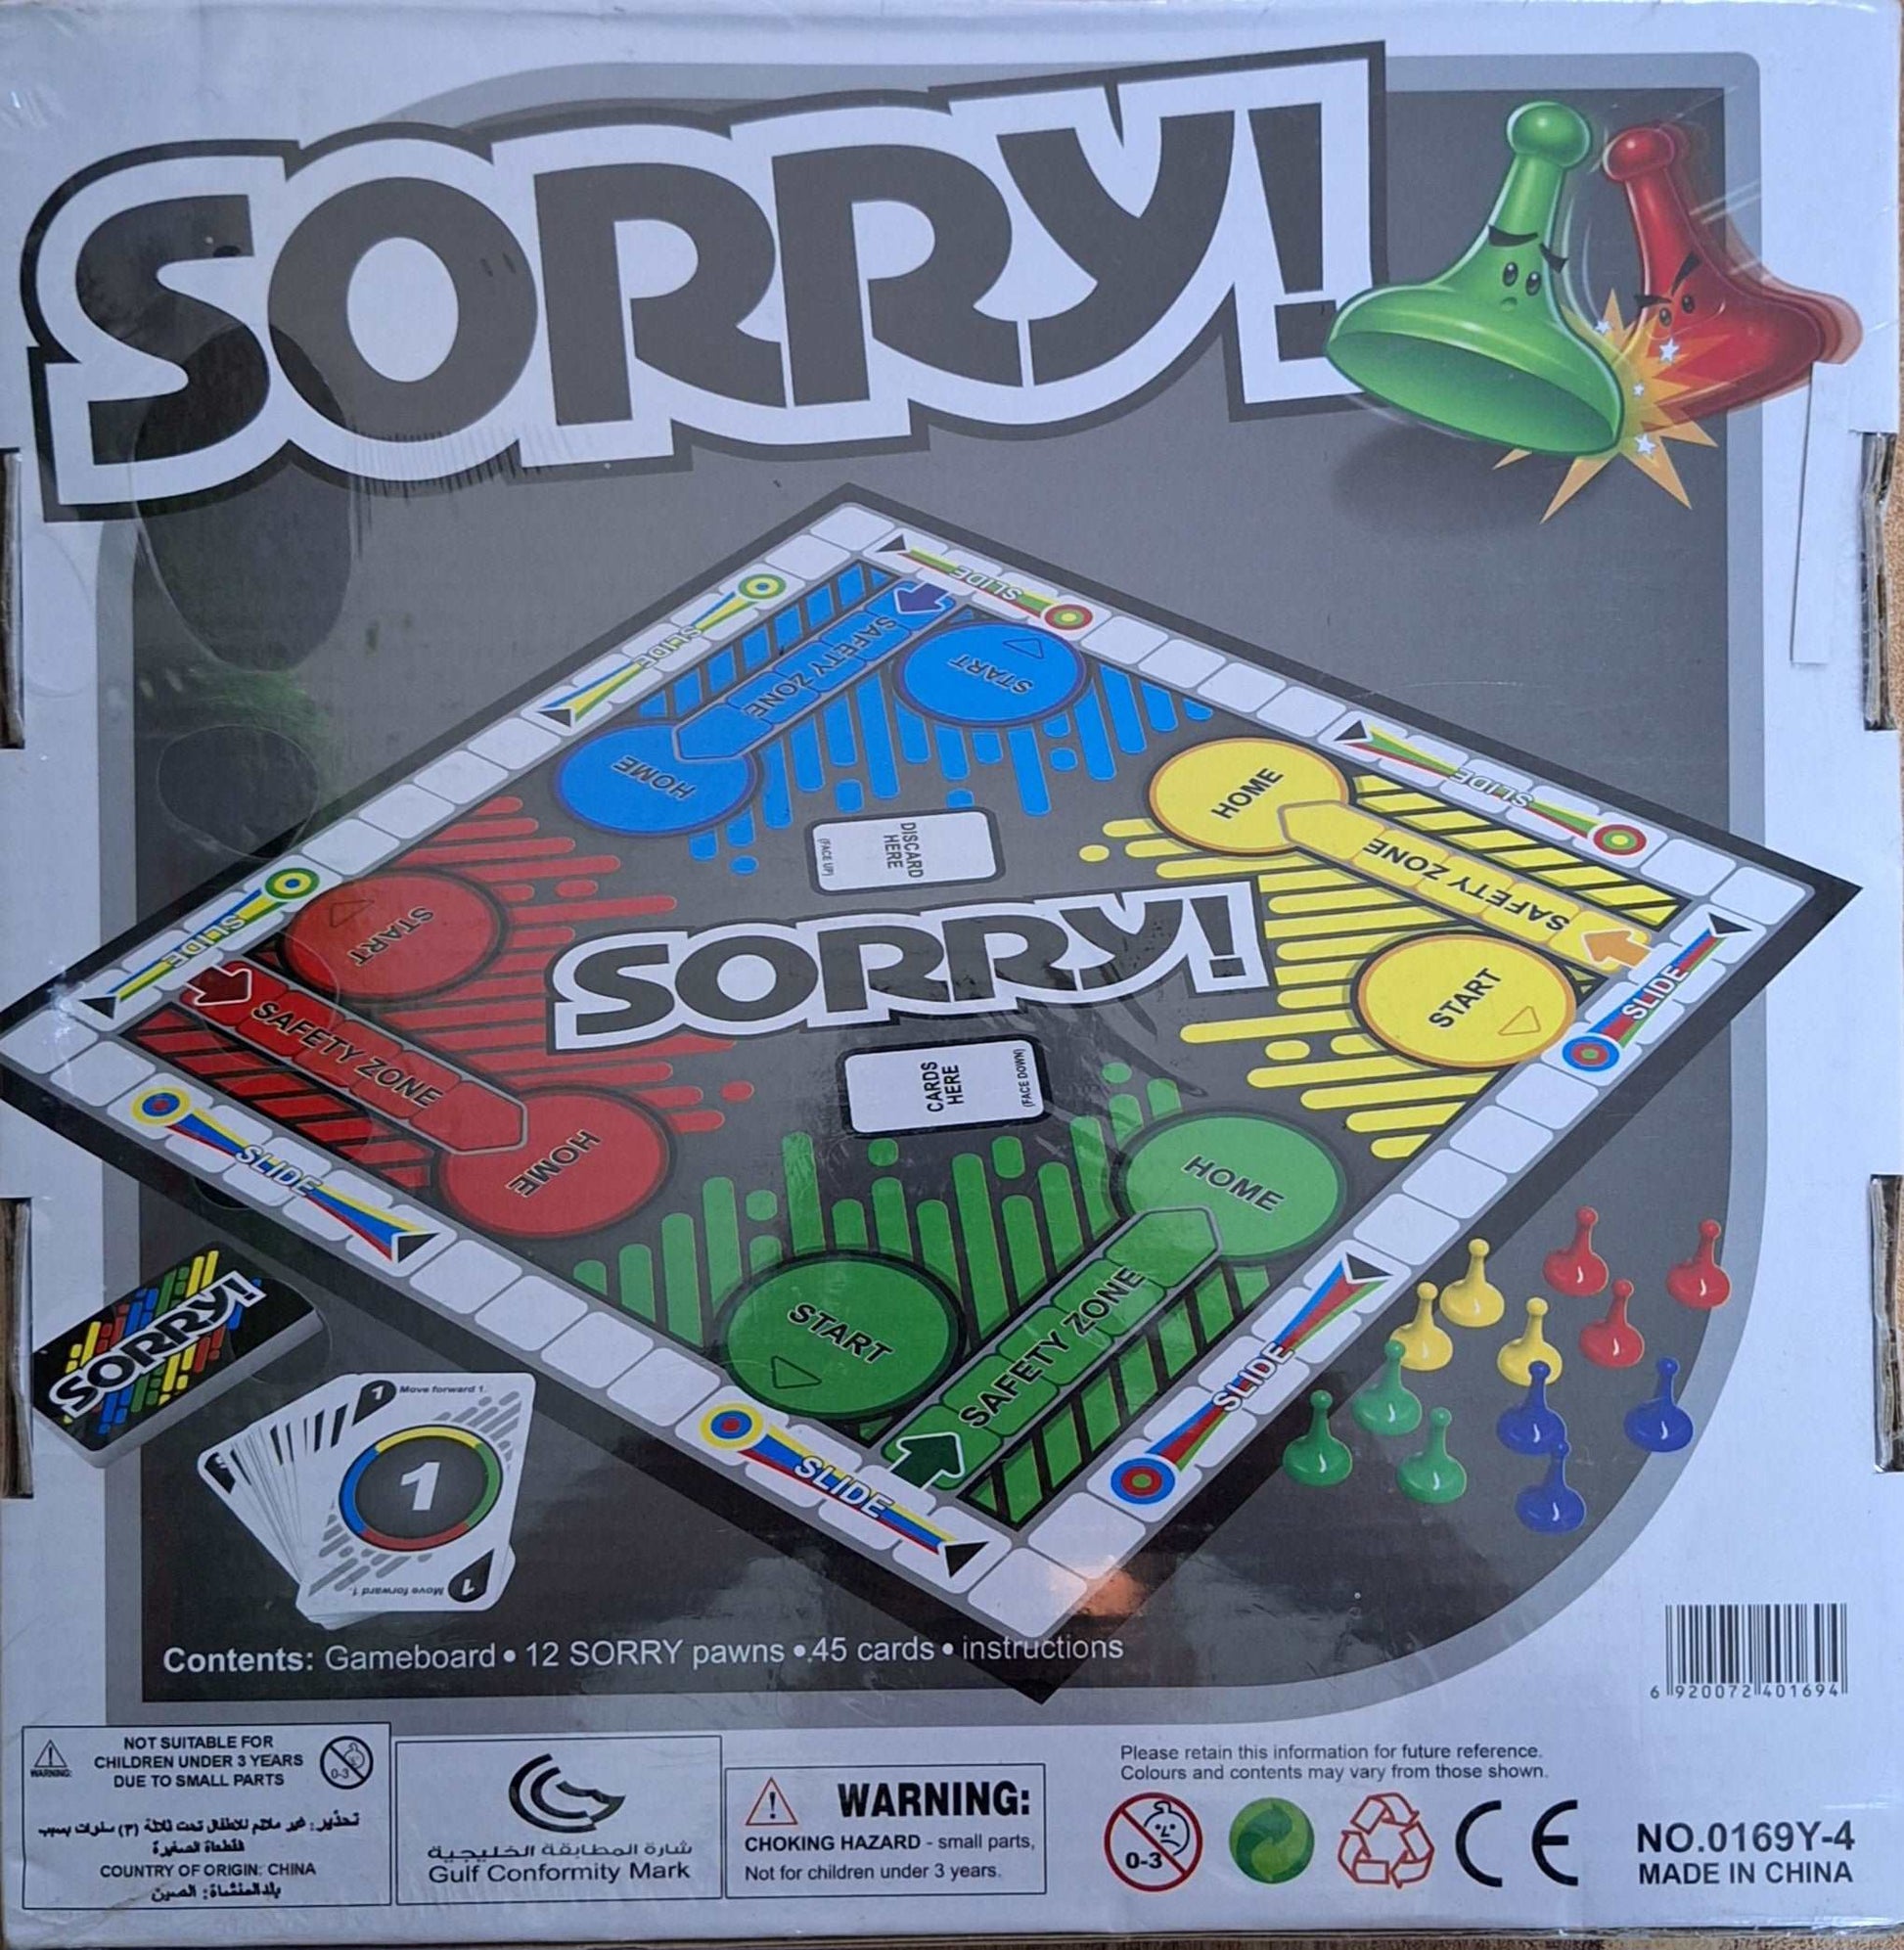 Sorry! Boardgame